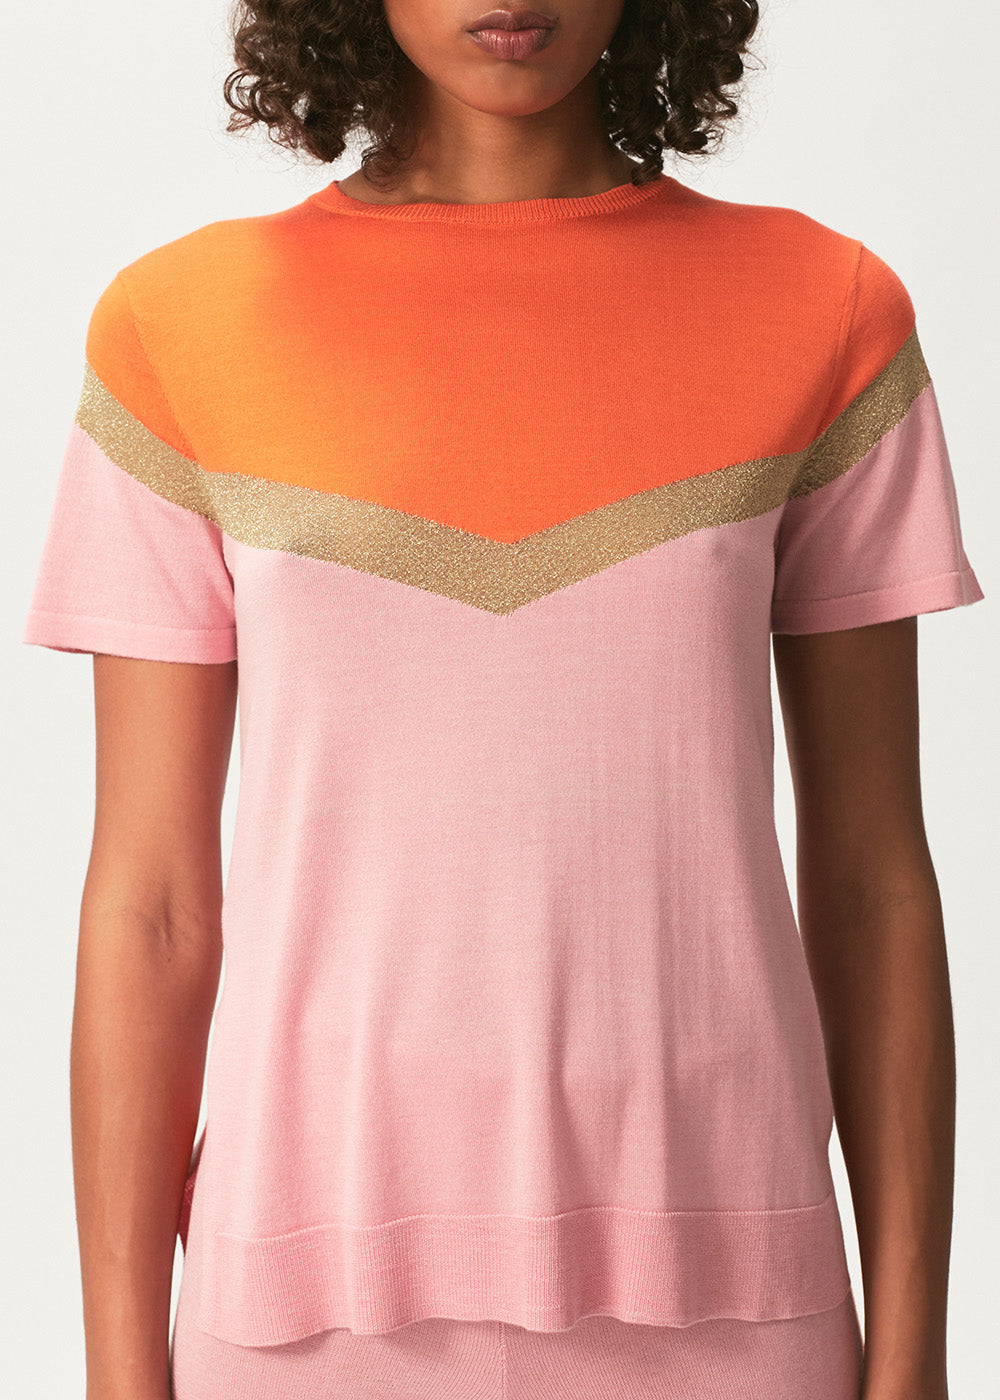 Igne Luxe Tee - Small / EMBER/PINK/GOLD LUREX